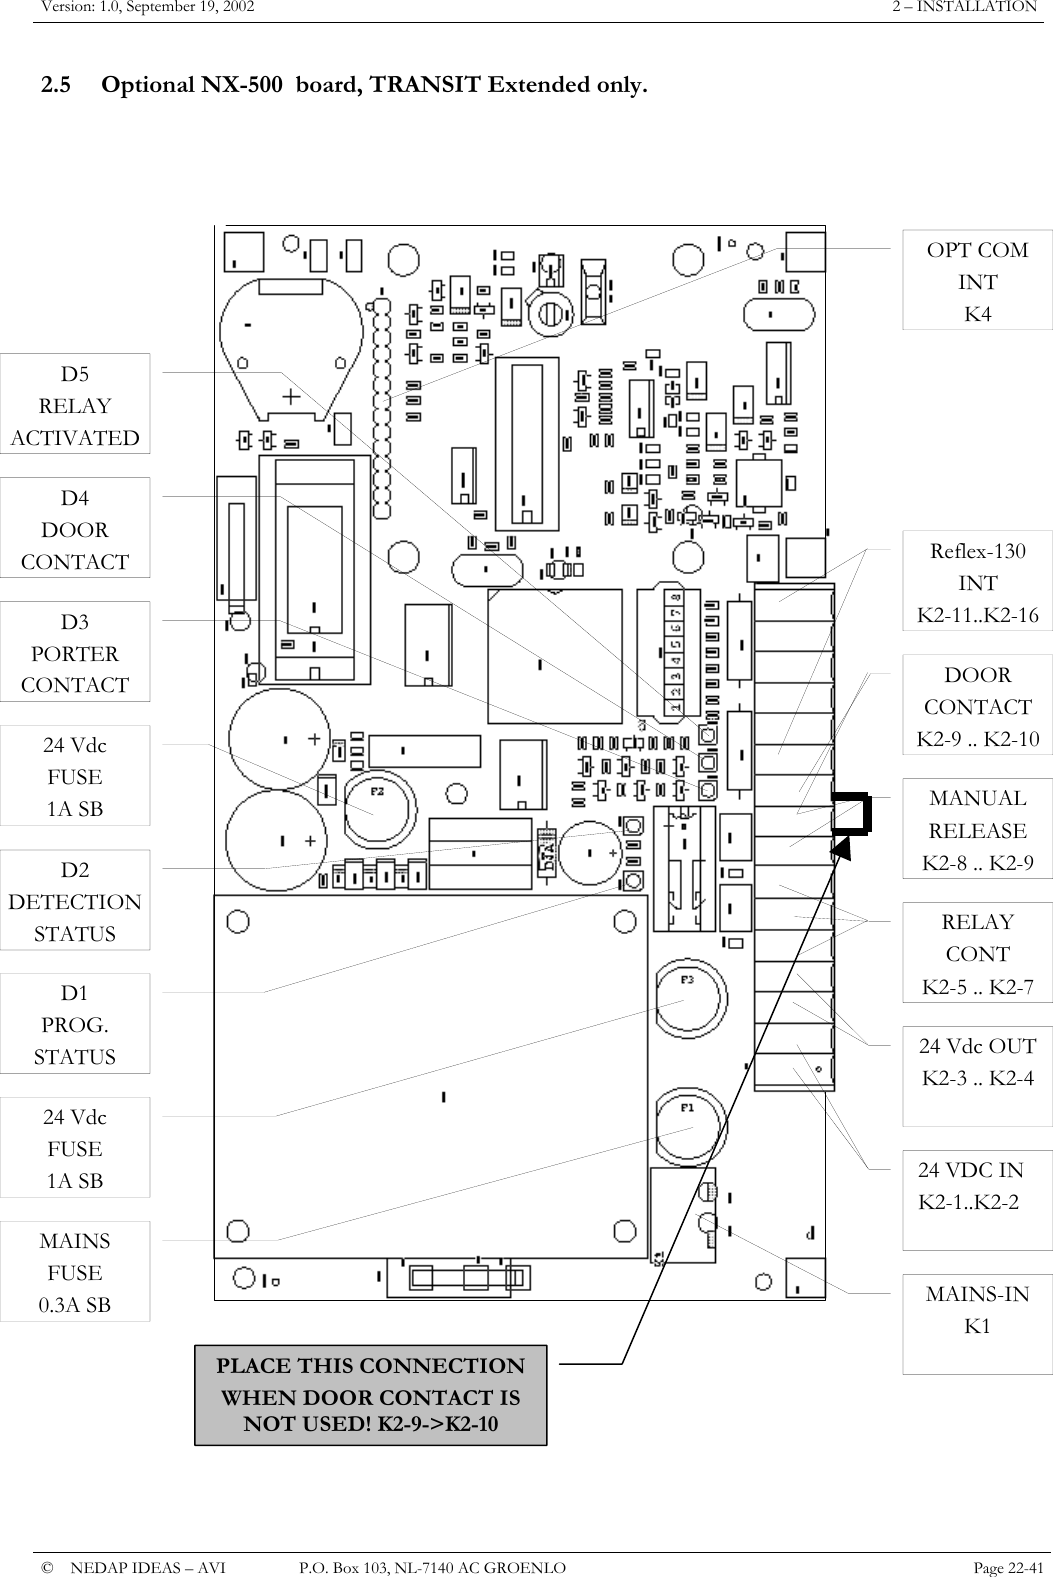 Version: 1.0, September 19, 2002  2 – INSTALLATION 2.5  Optional NX-500  board, TRANSIT Extended only.                                           PLACE THIS CONNECTIONWHEN DOOR CONTACT IS NOT USED! K2-9-&gt;K2-10 MAINS FUSE 0.3A SB 24 Vdc FUSE 1A SB 24 Vdc FUSE 1A SB Reflex-130 INT K2-11..K2-16 D1 PROG. STATUS D2 DETECTION STATUSD3 PORTER CONTACT D4 DOOR CONTACT D5 RELAY ACTIVATED OPT COM INT K4 DOOR CONTACT K2-9 .. K2-10MAINS-IN K1 24 VDC IN K2-1..K2-2 24 Vdc OUTK2-3 .. K2-4 RELAY CONT K2-5 .. K2-7 MANUAL RELEASE K2-8 .. K2-9   ©  NEDAP IDEAS – AVI   P.O. Box 103, NL-7140 AC GROENLO Page 22-41   